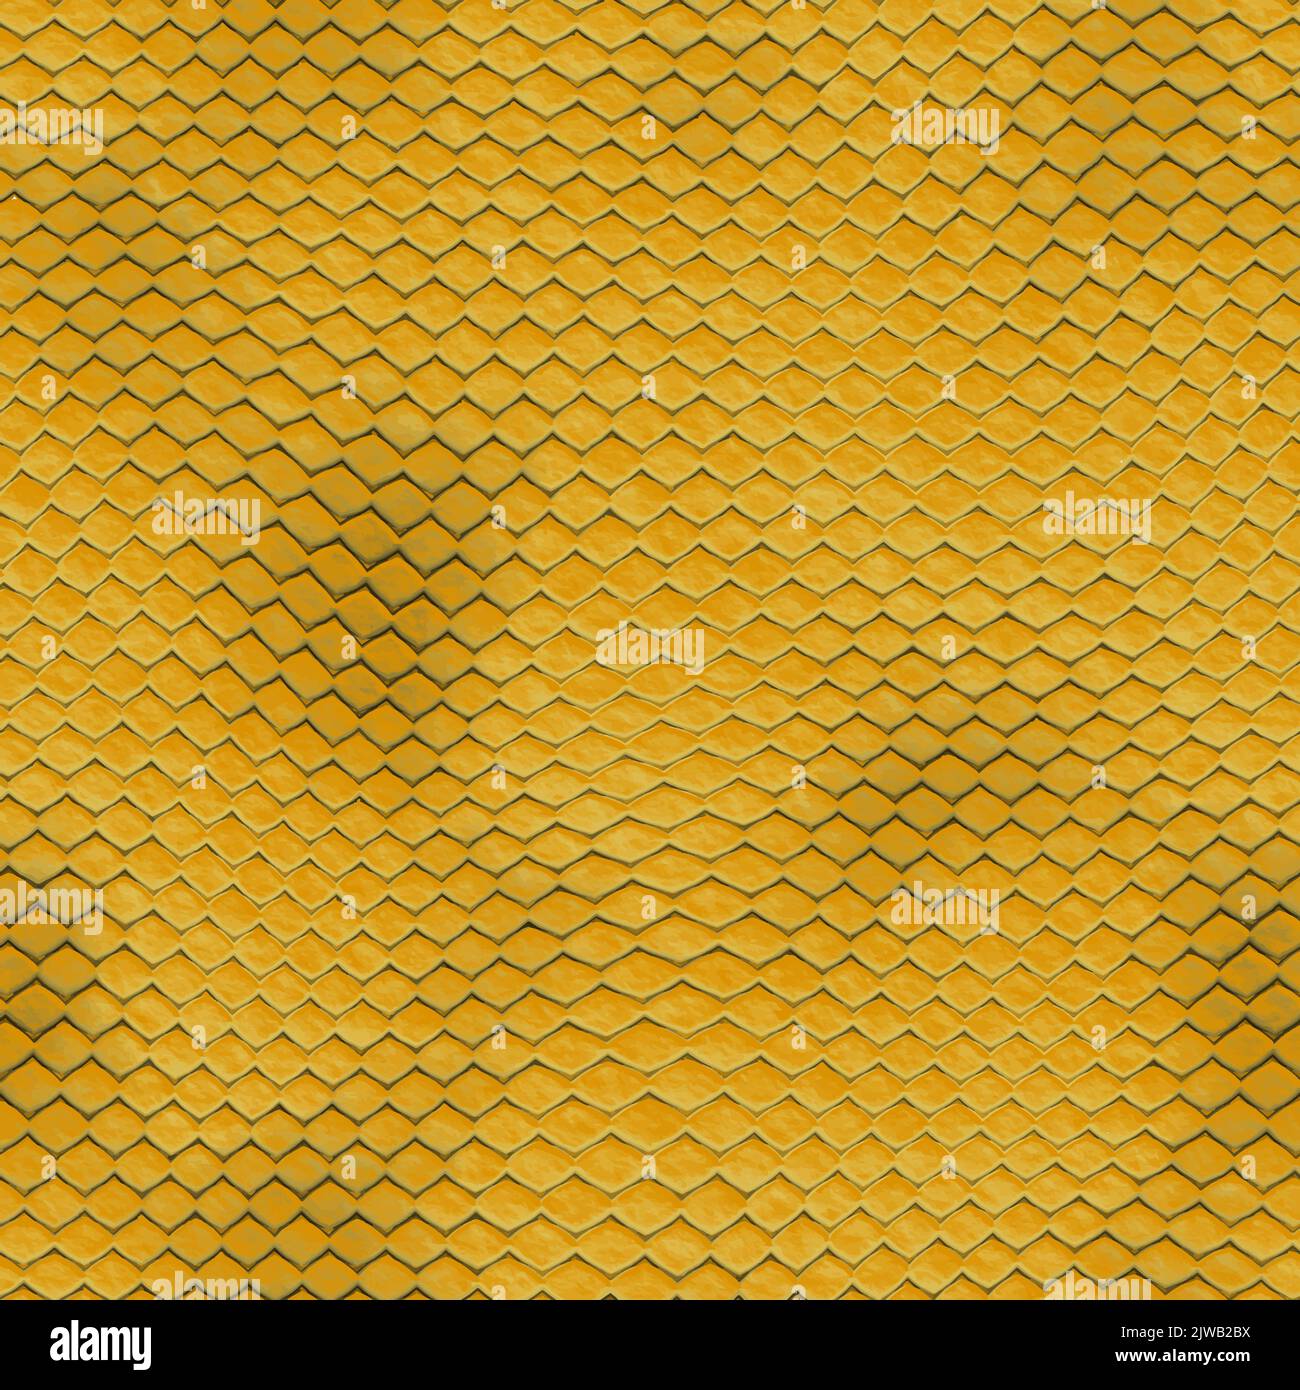 Alligator skin texture. Seamless crocodile pattern, reptile with yellow grooves leather wild tropical animal. Crocodile pattern skin illustration, tex Stock Vector